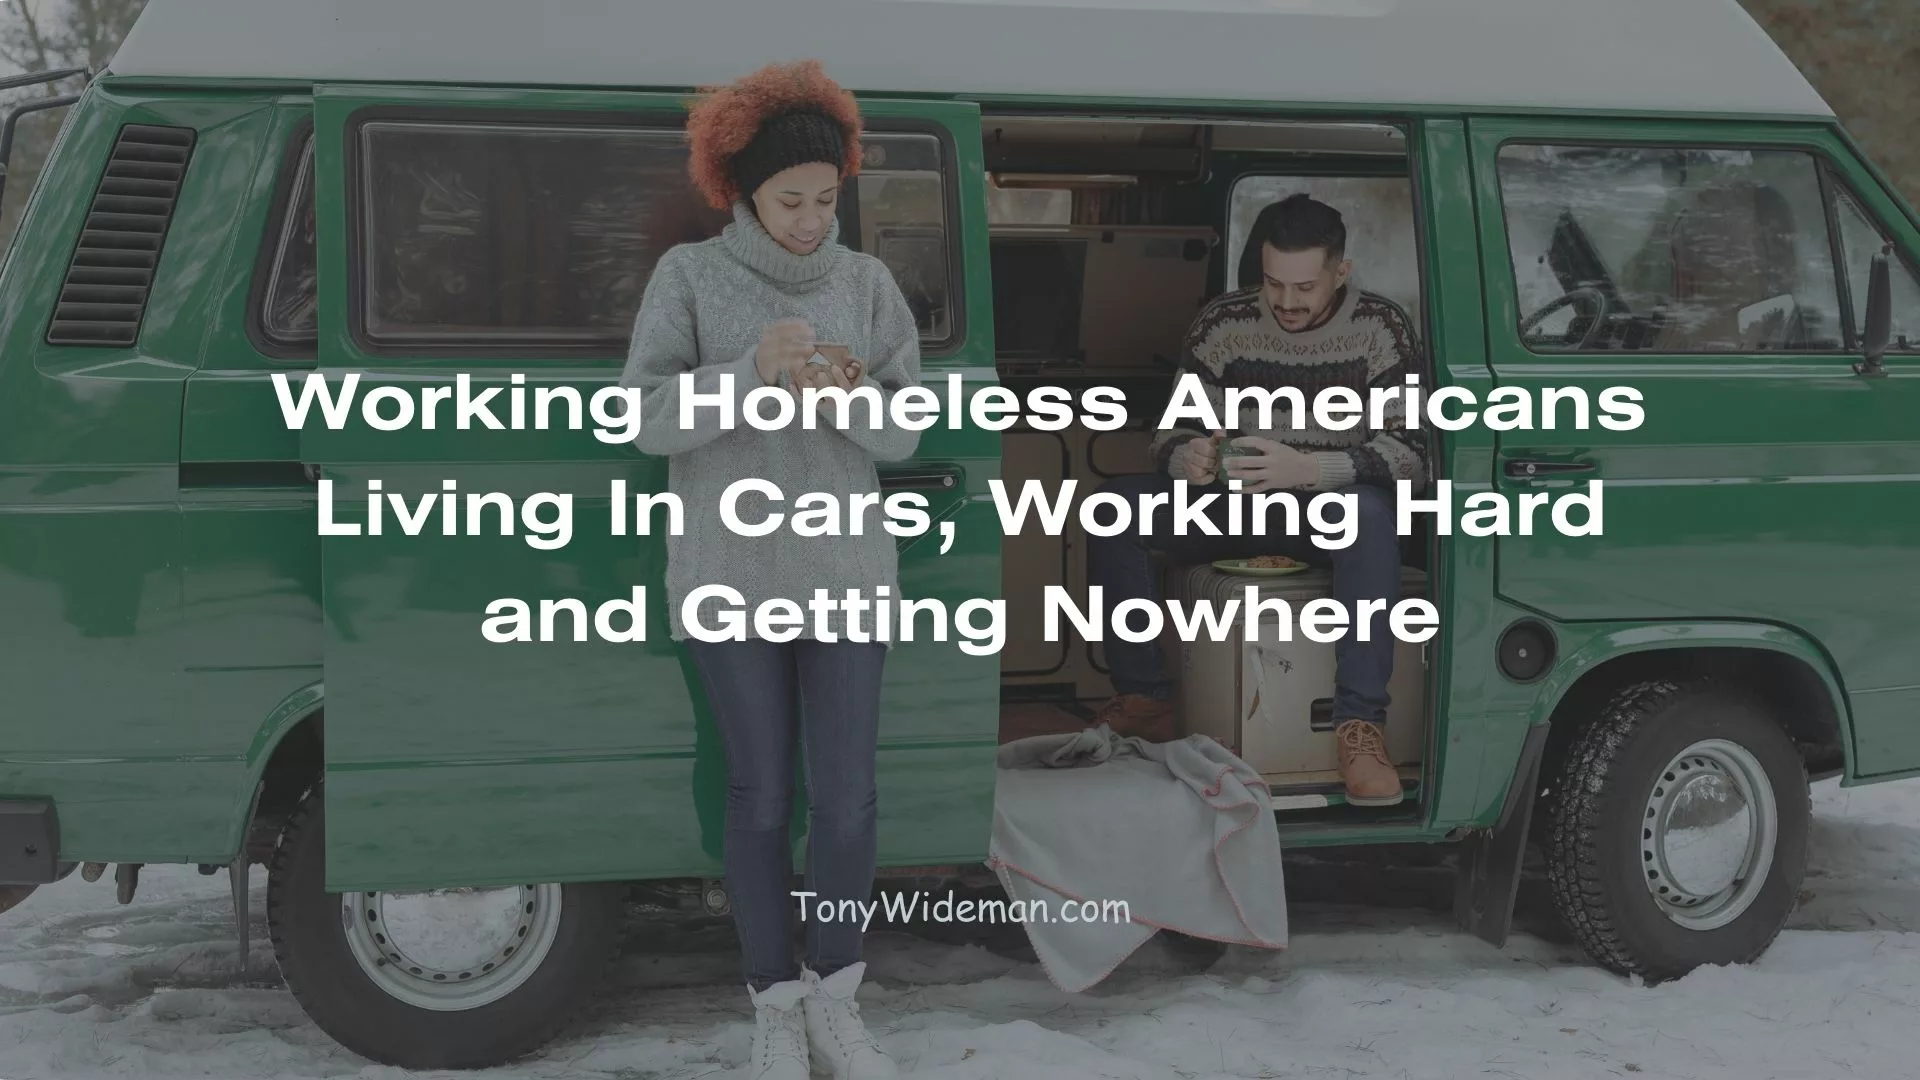 Working Homeless Americans Living In Cars, Working Hard and Getting Nowhere